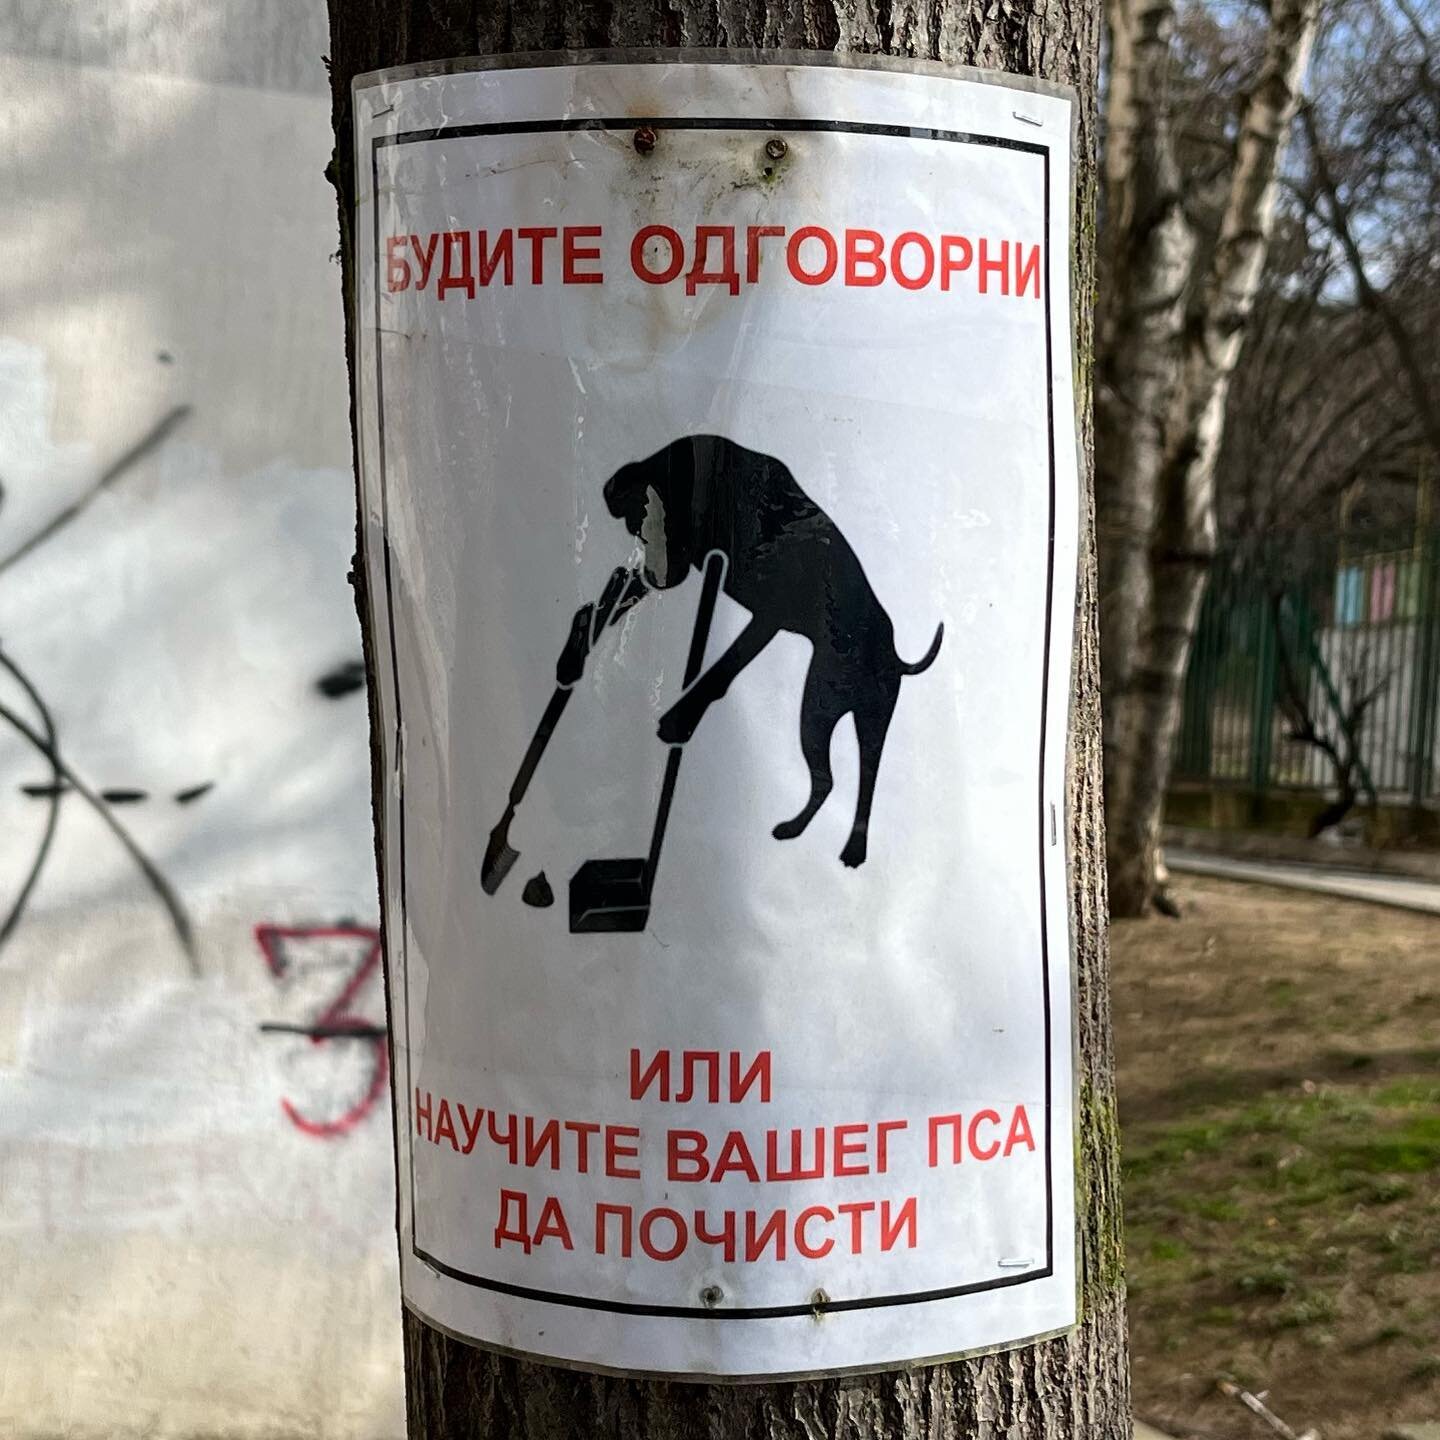 On the topic of dog poop signs&hellip; this one I found in Belgrade says &ldquo;Be responsible or teach your dog to pick up.&rdquo; See, that&rsquo;s a nicer way of asking people to clean up after their dog! 🐶💩